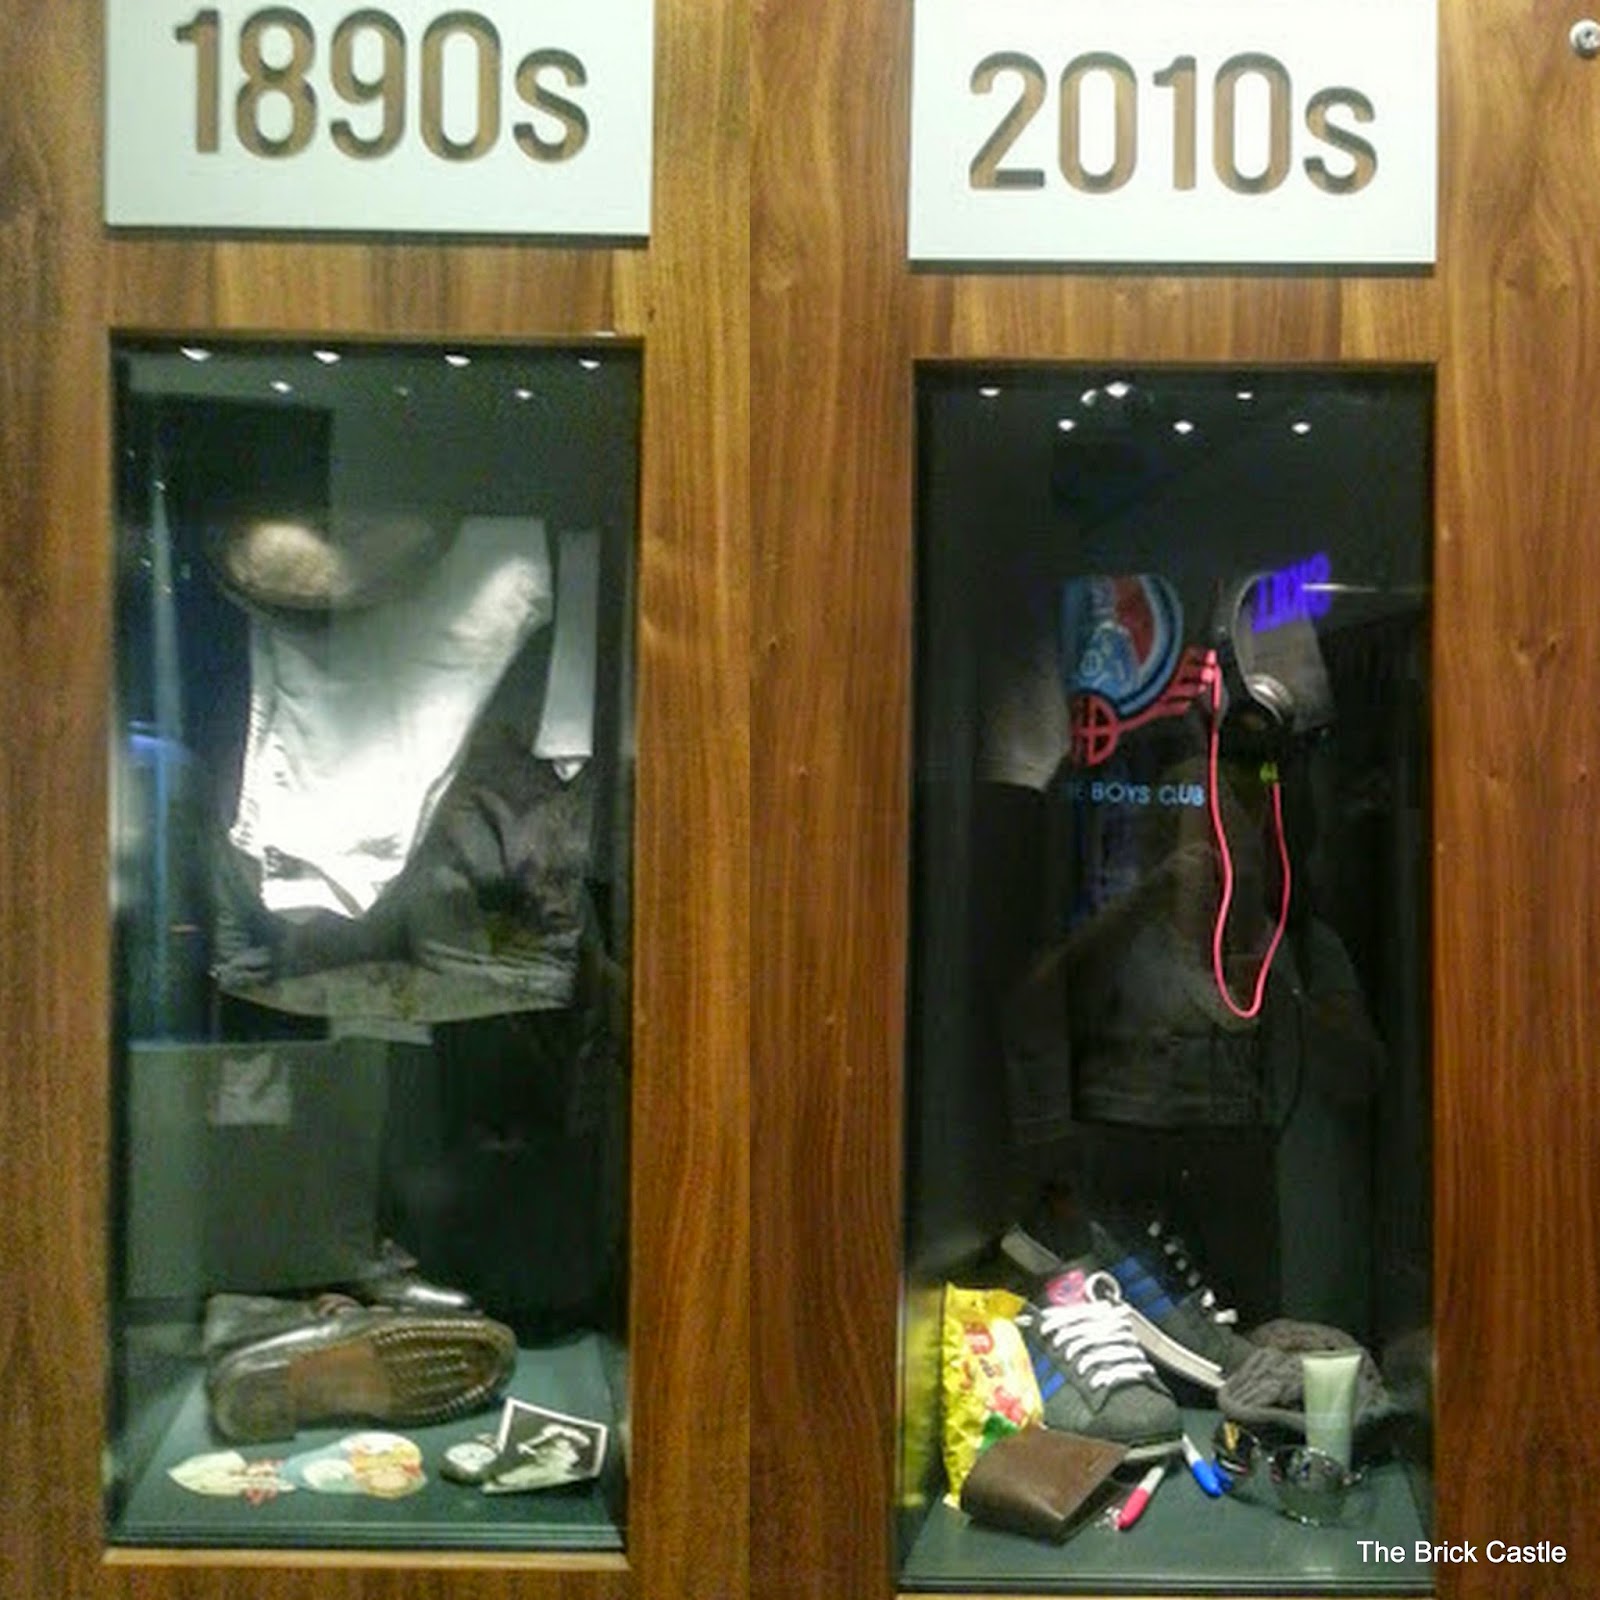 The National Football Museum at Urbis, Manchester Dressing Room Lockers from 1890's and 2010's